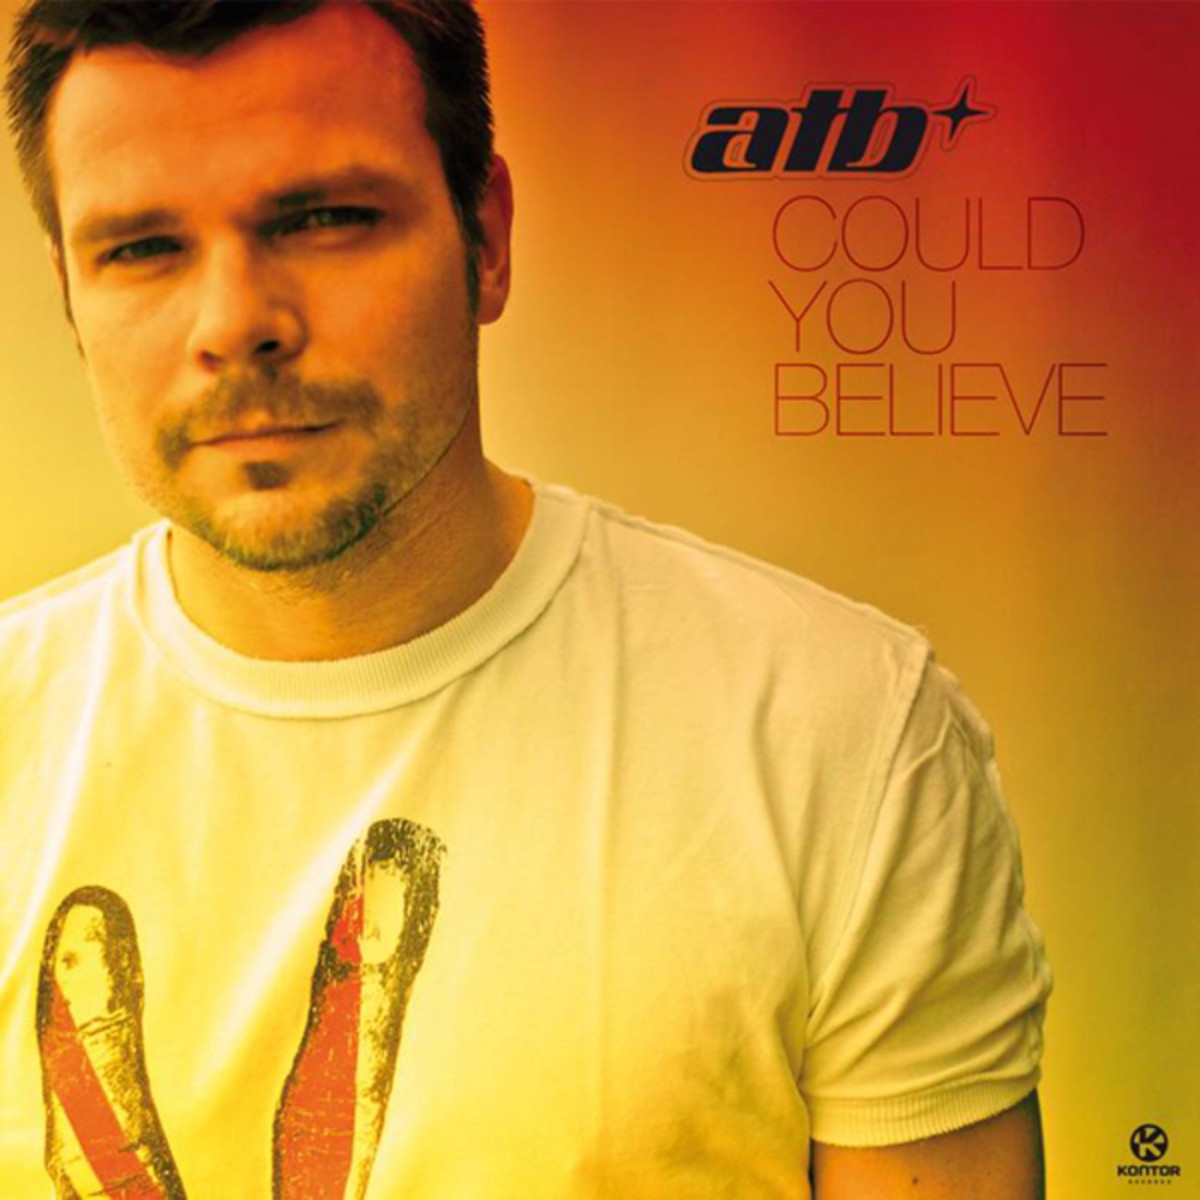 Could You Believe (Original Mix)